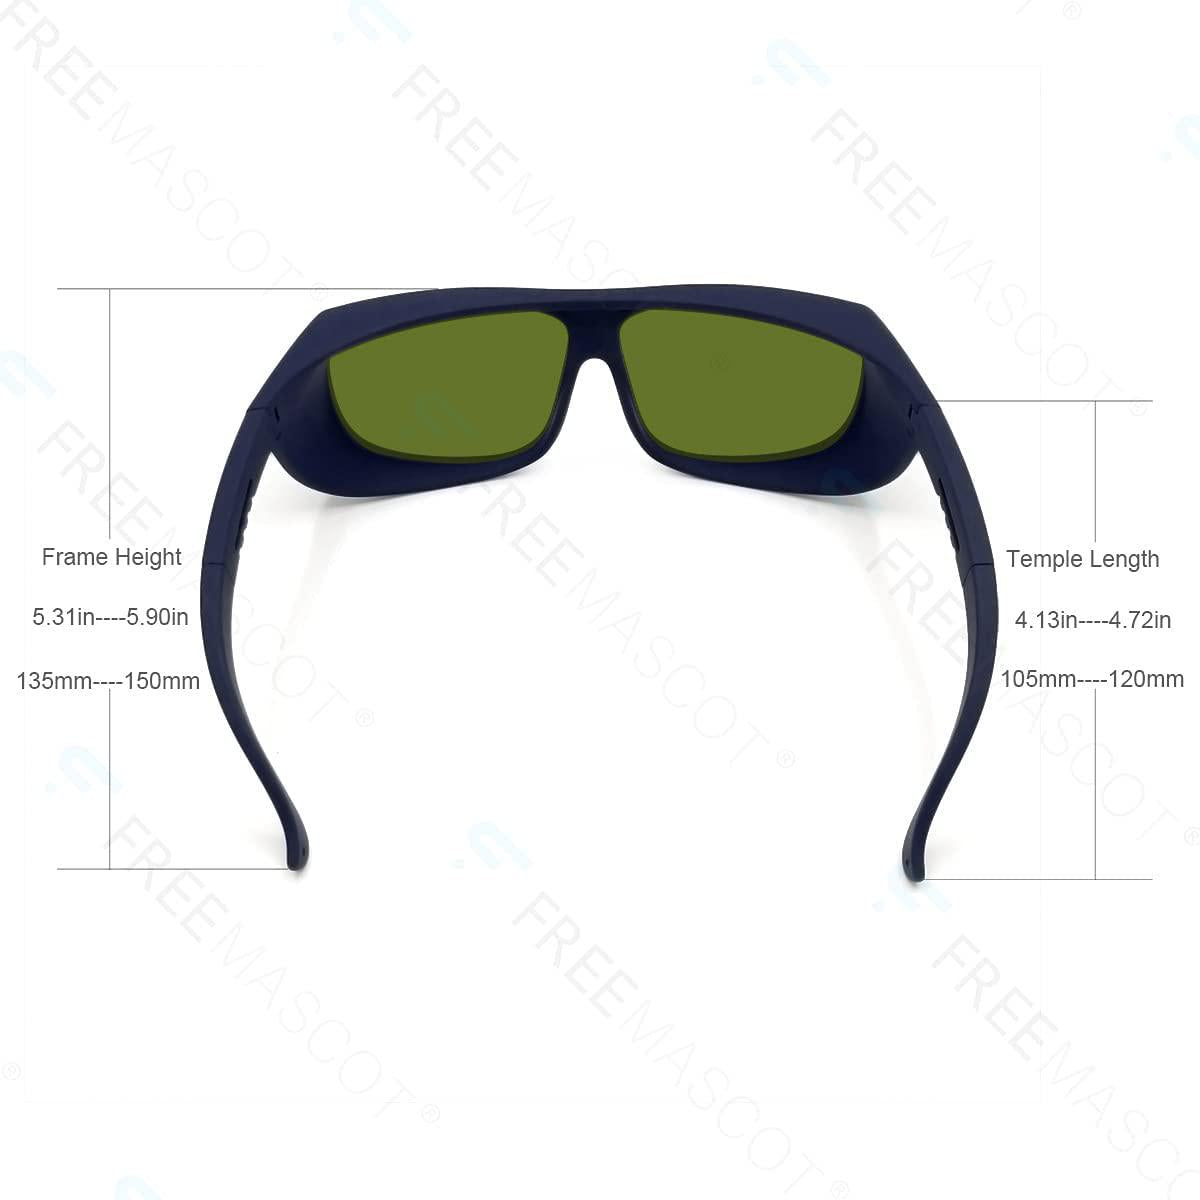 FreeMascot, FreeMascot Professional OD 8+ 190nm-450nm/800nm-1100nm Wavelength Laser Safety Glasses for Typical 405nm, 445nm, 808nm, 980nm, 1064nm 1070nm, 1080nm Laser Light (Style 5)